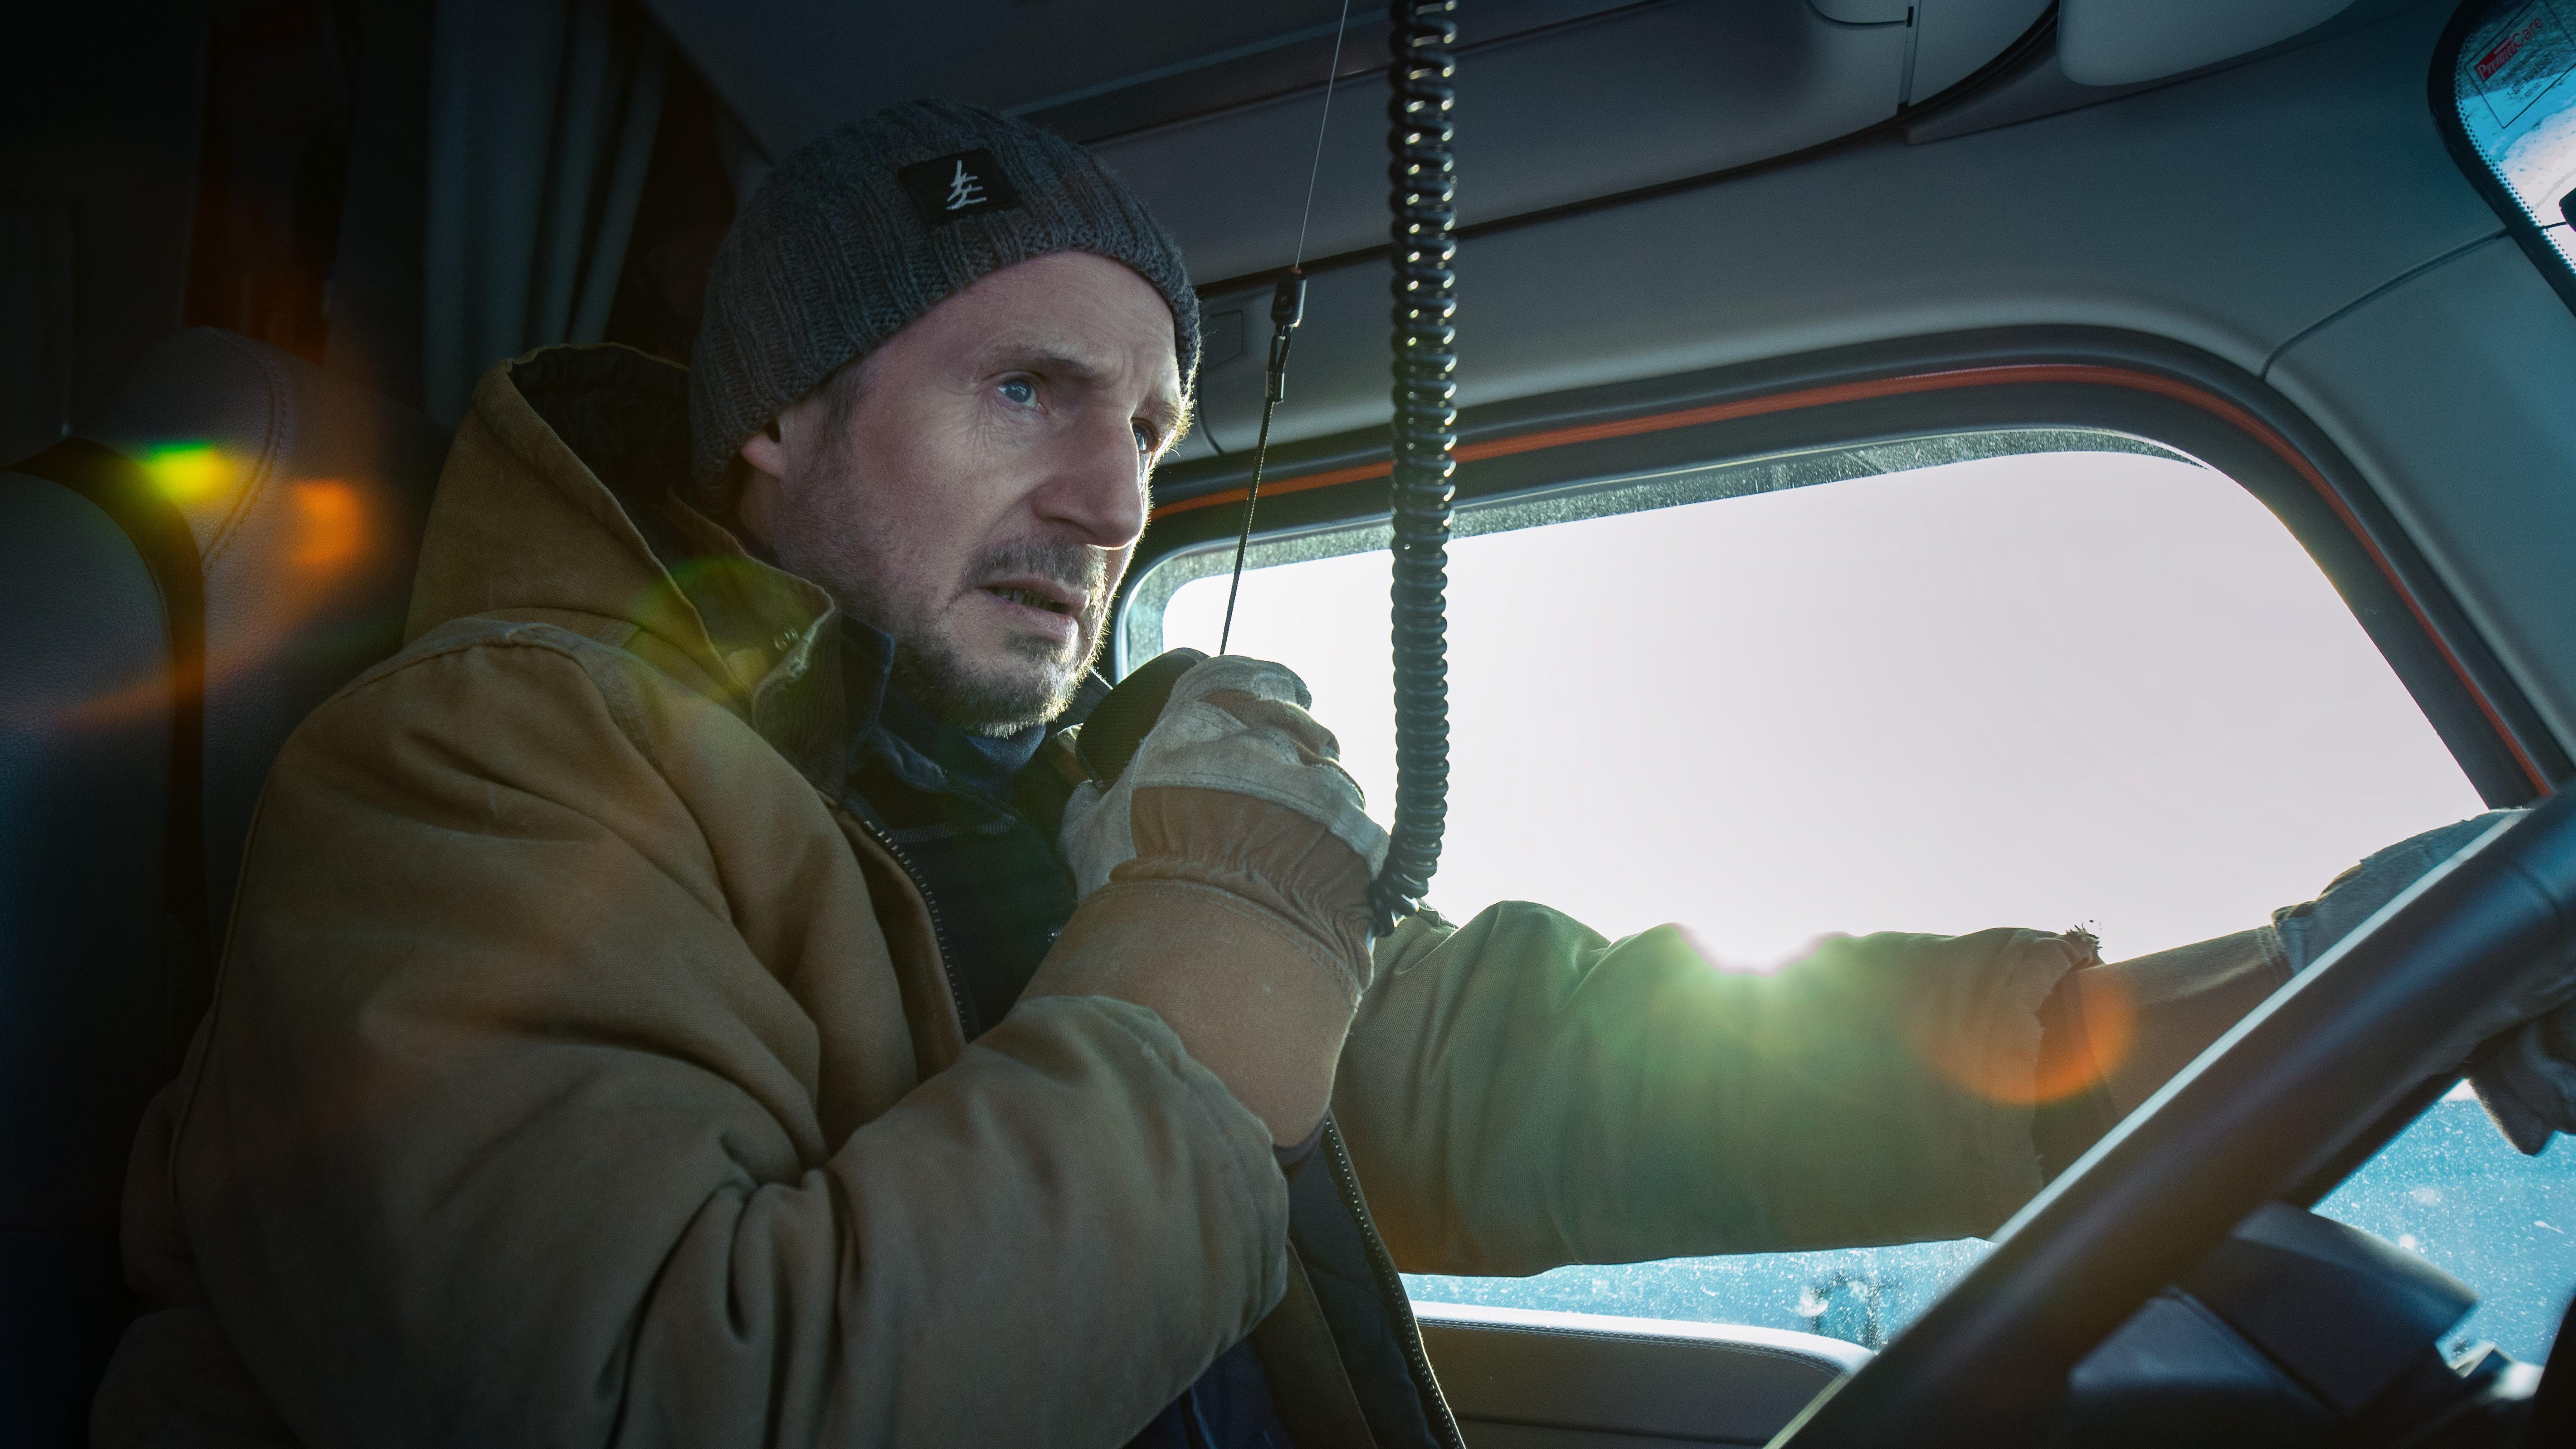 It’s Liam Neeson vs. surface tension in Netflix’s passable thriller The Ice Road